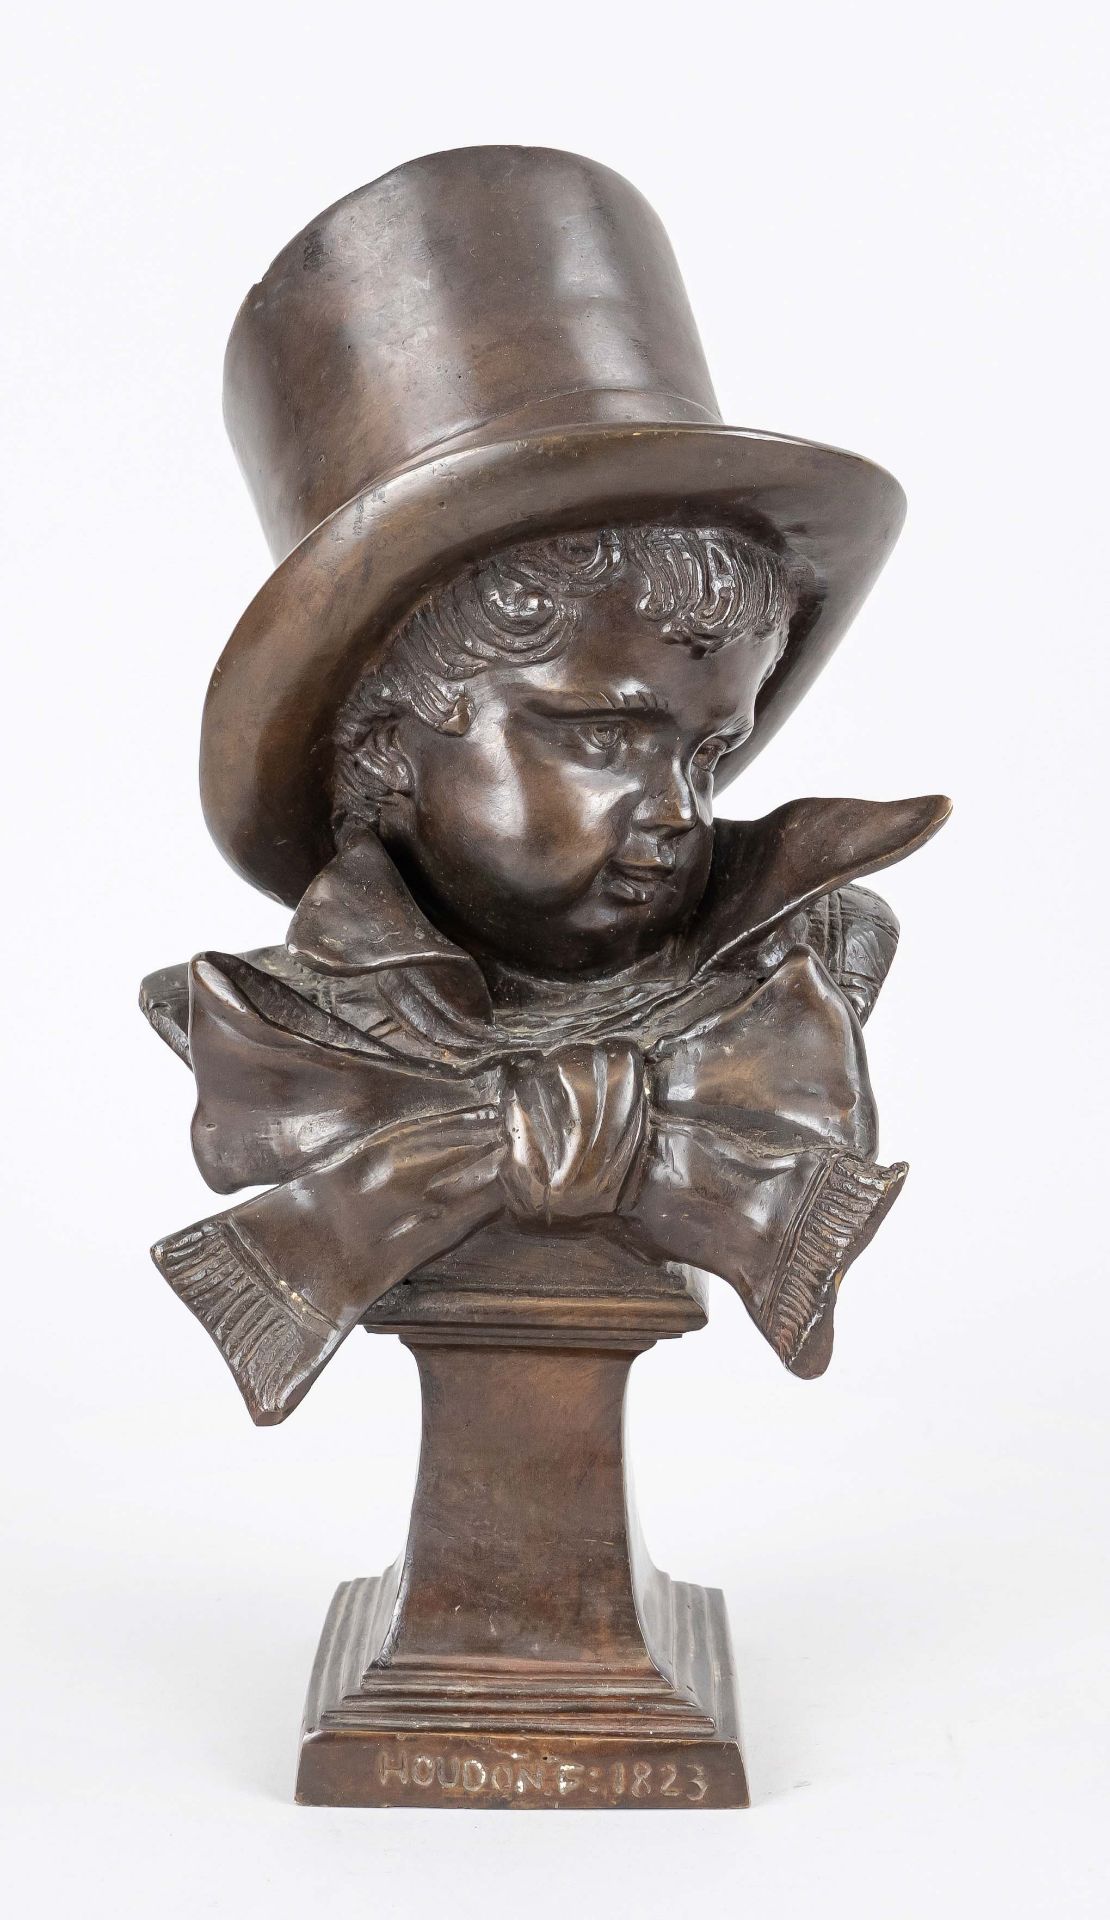 Bust of a child with a top hat, bronze casting of the 21st century after Houdon, dark brown